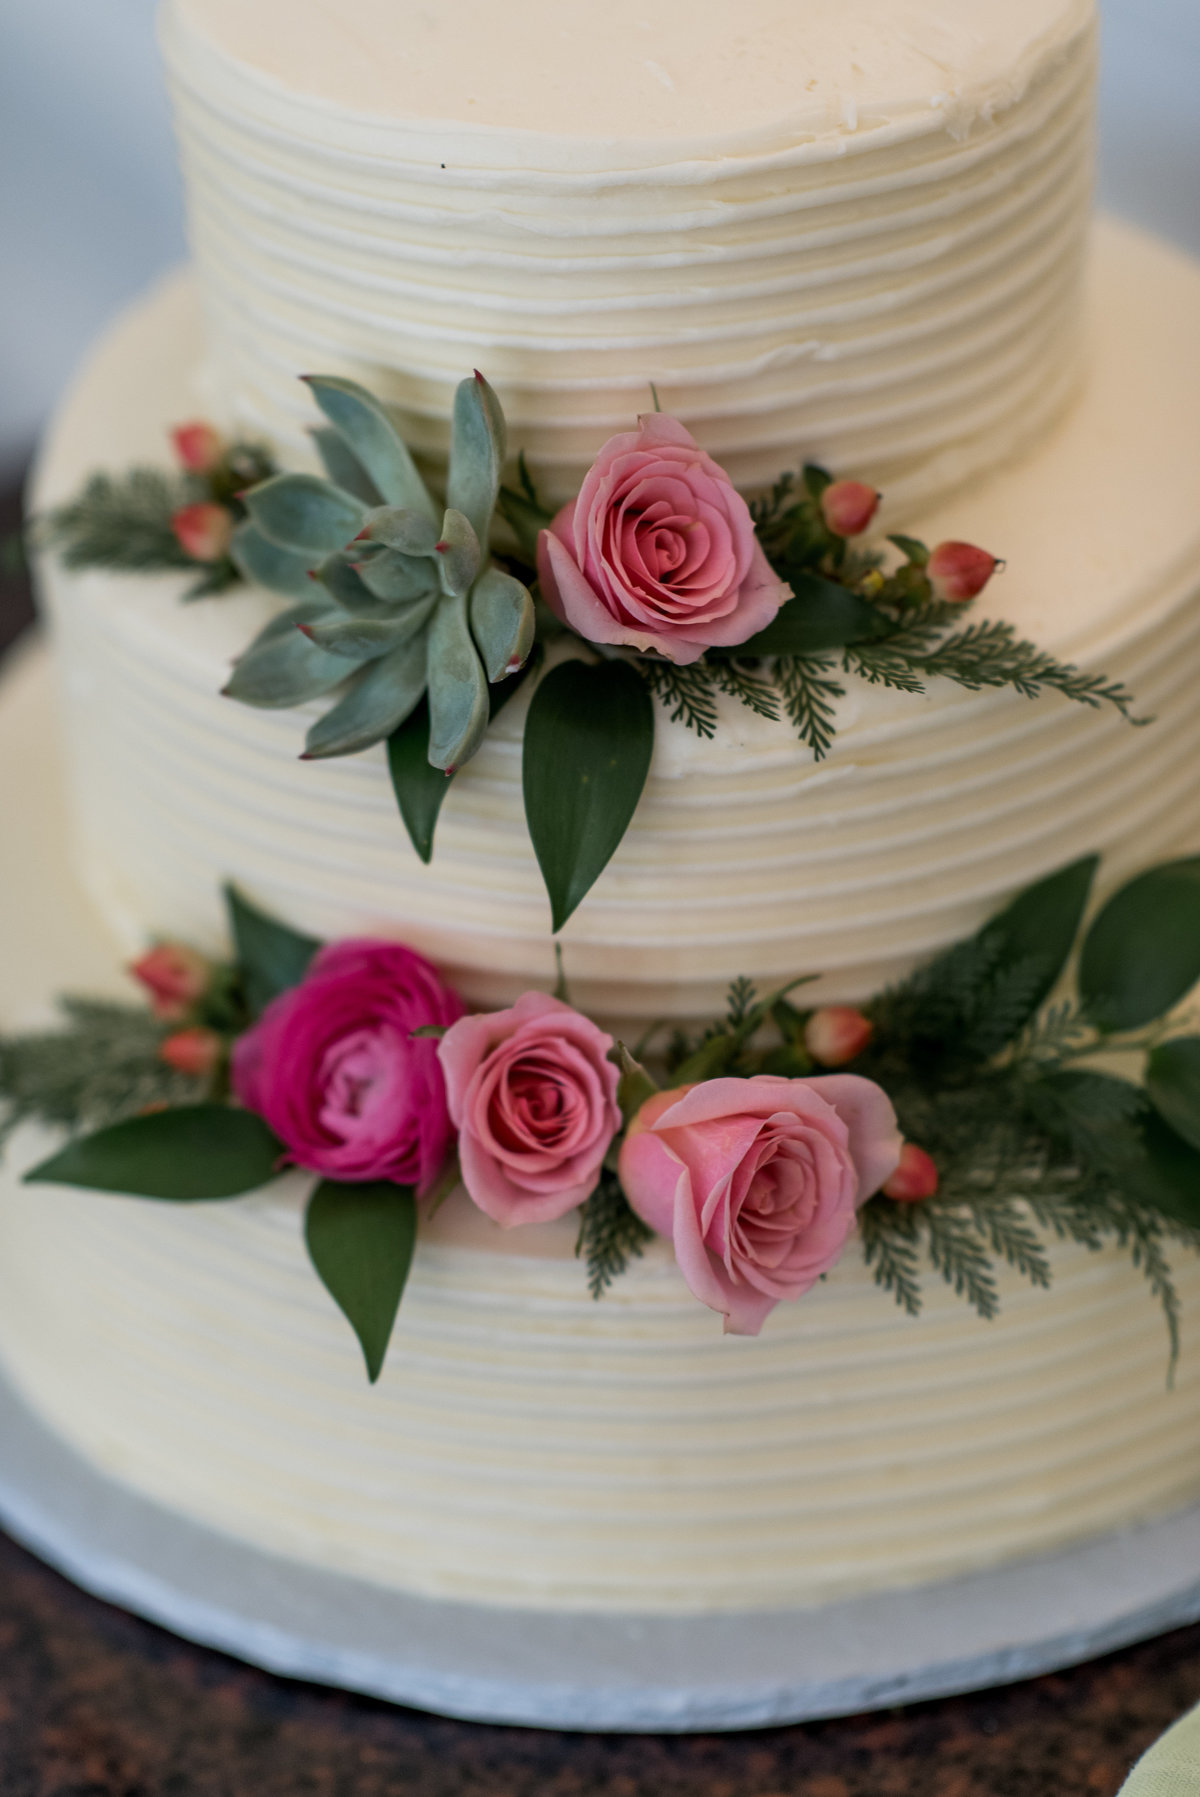 Wedding cake with  floral décor including pink spray roses and succulent